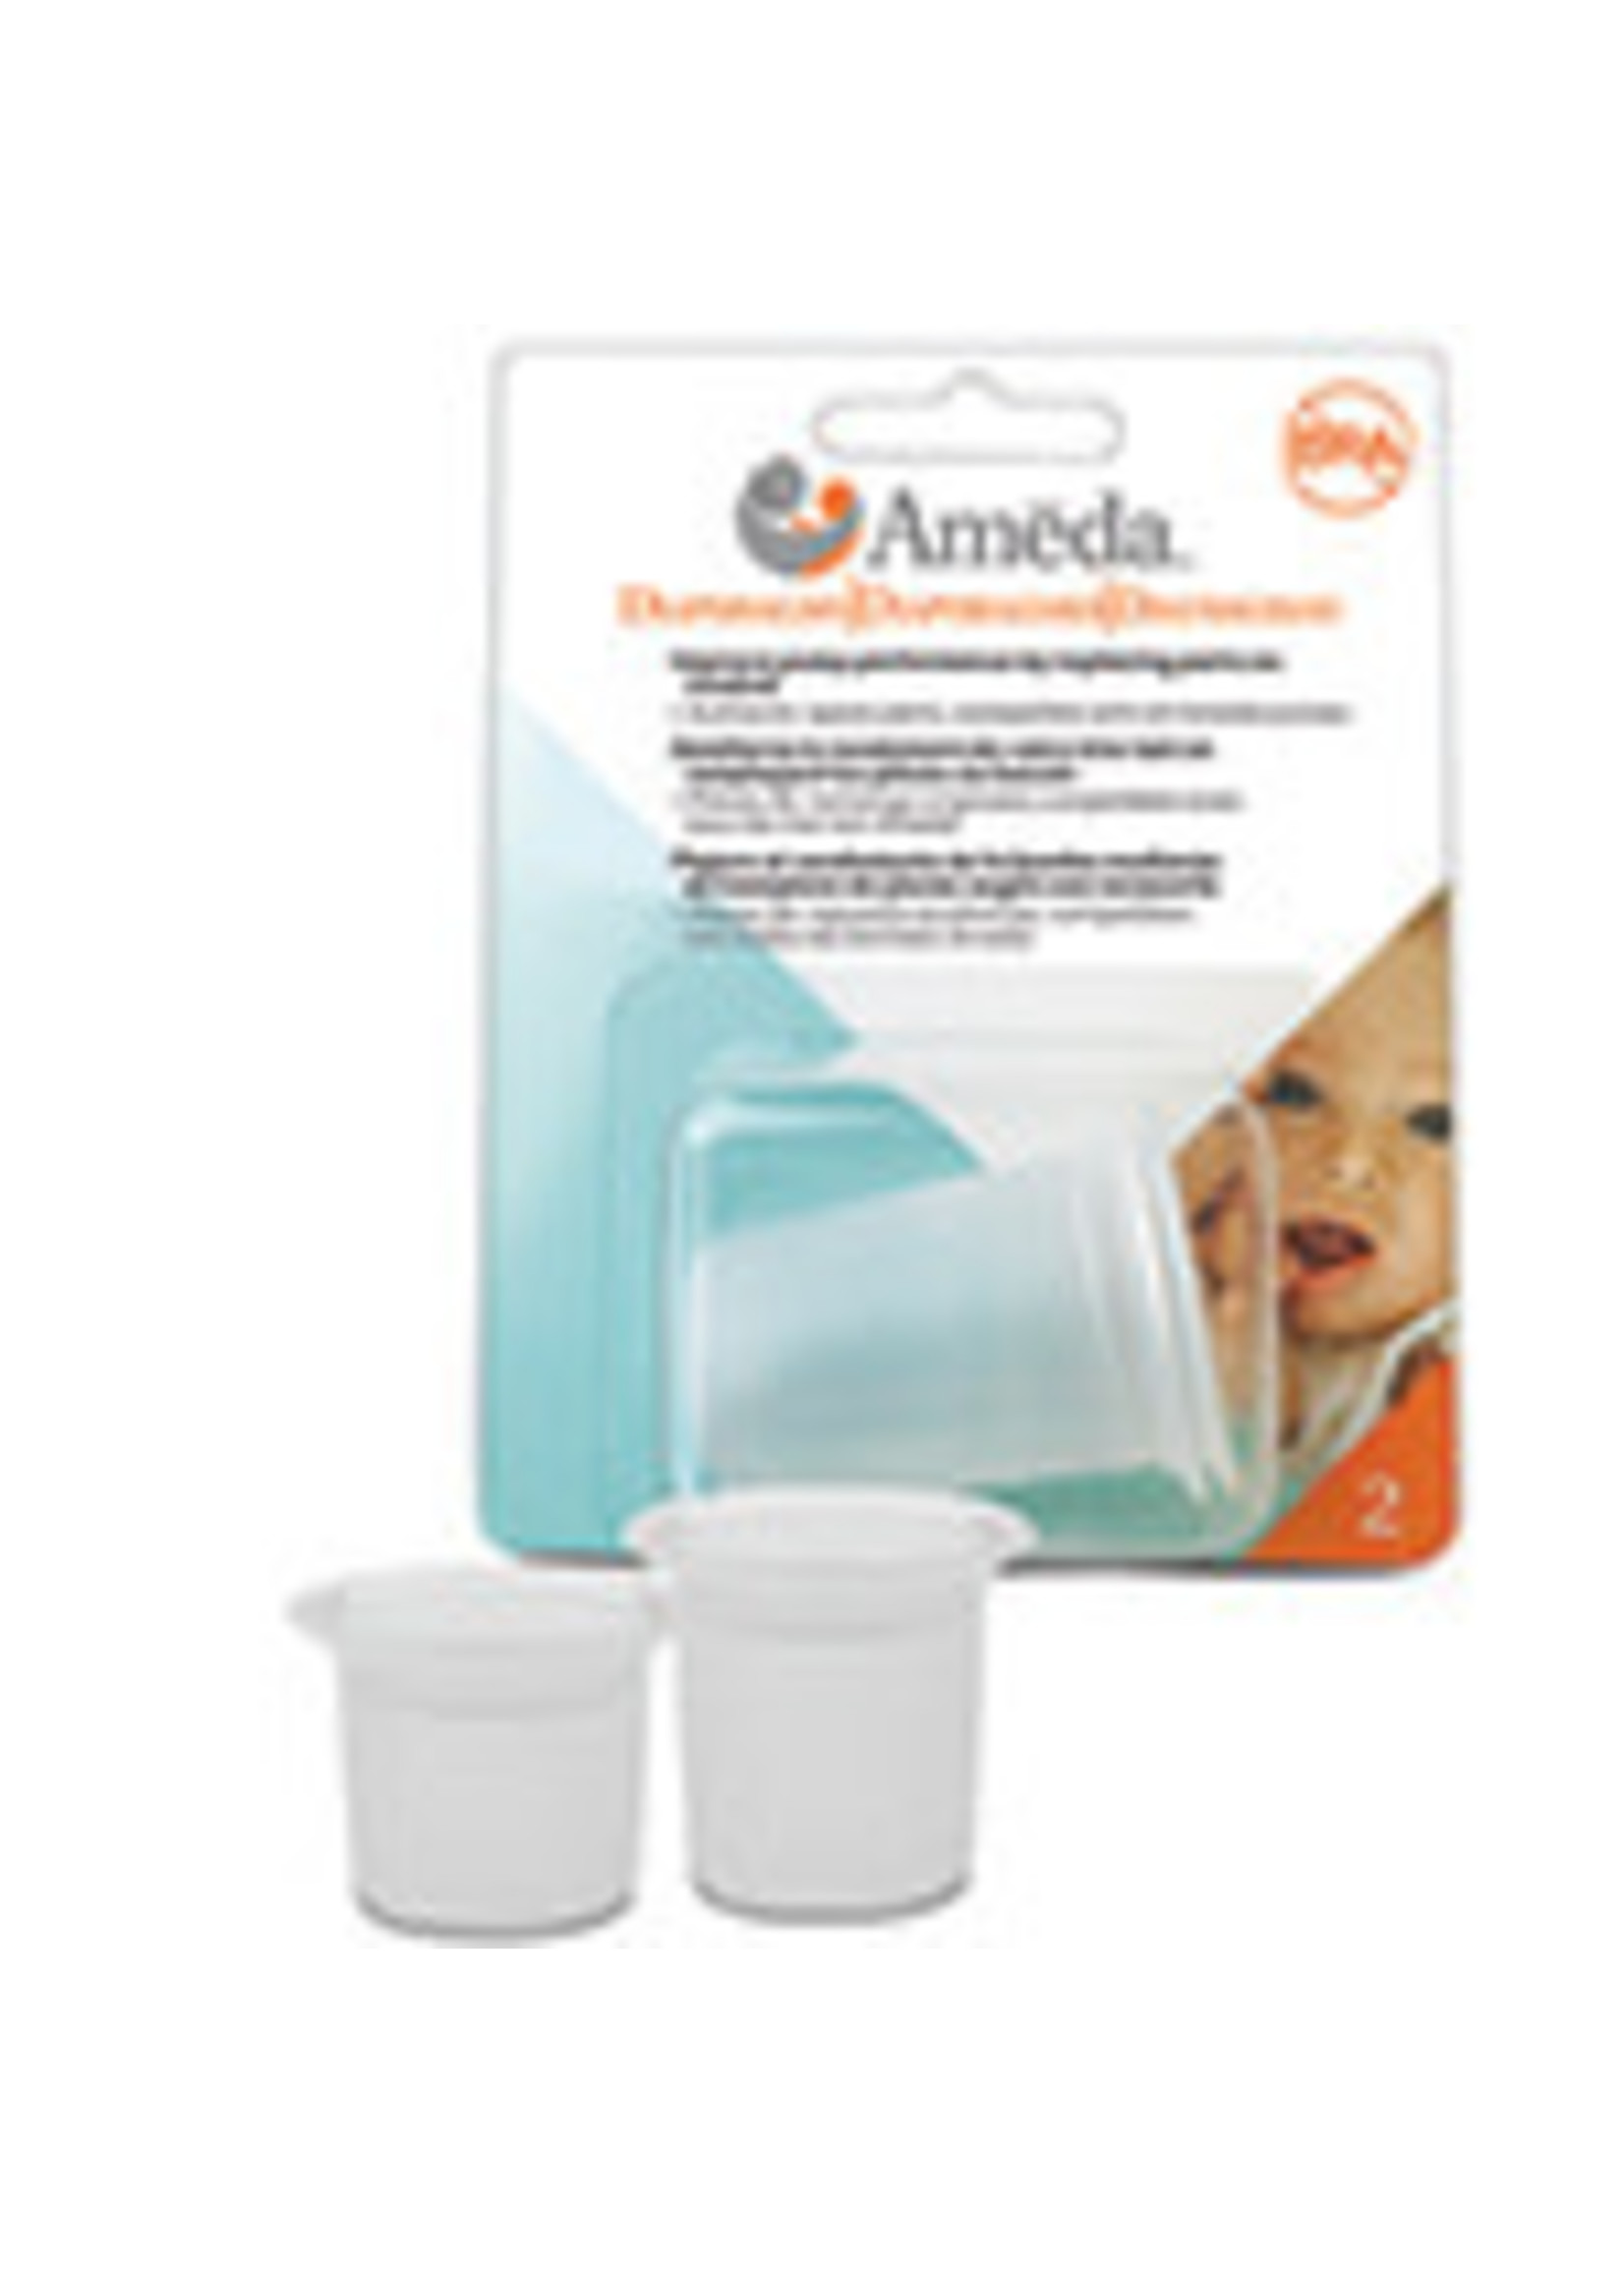 Ameda Silicone Diaphragms, 2 Count